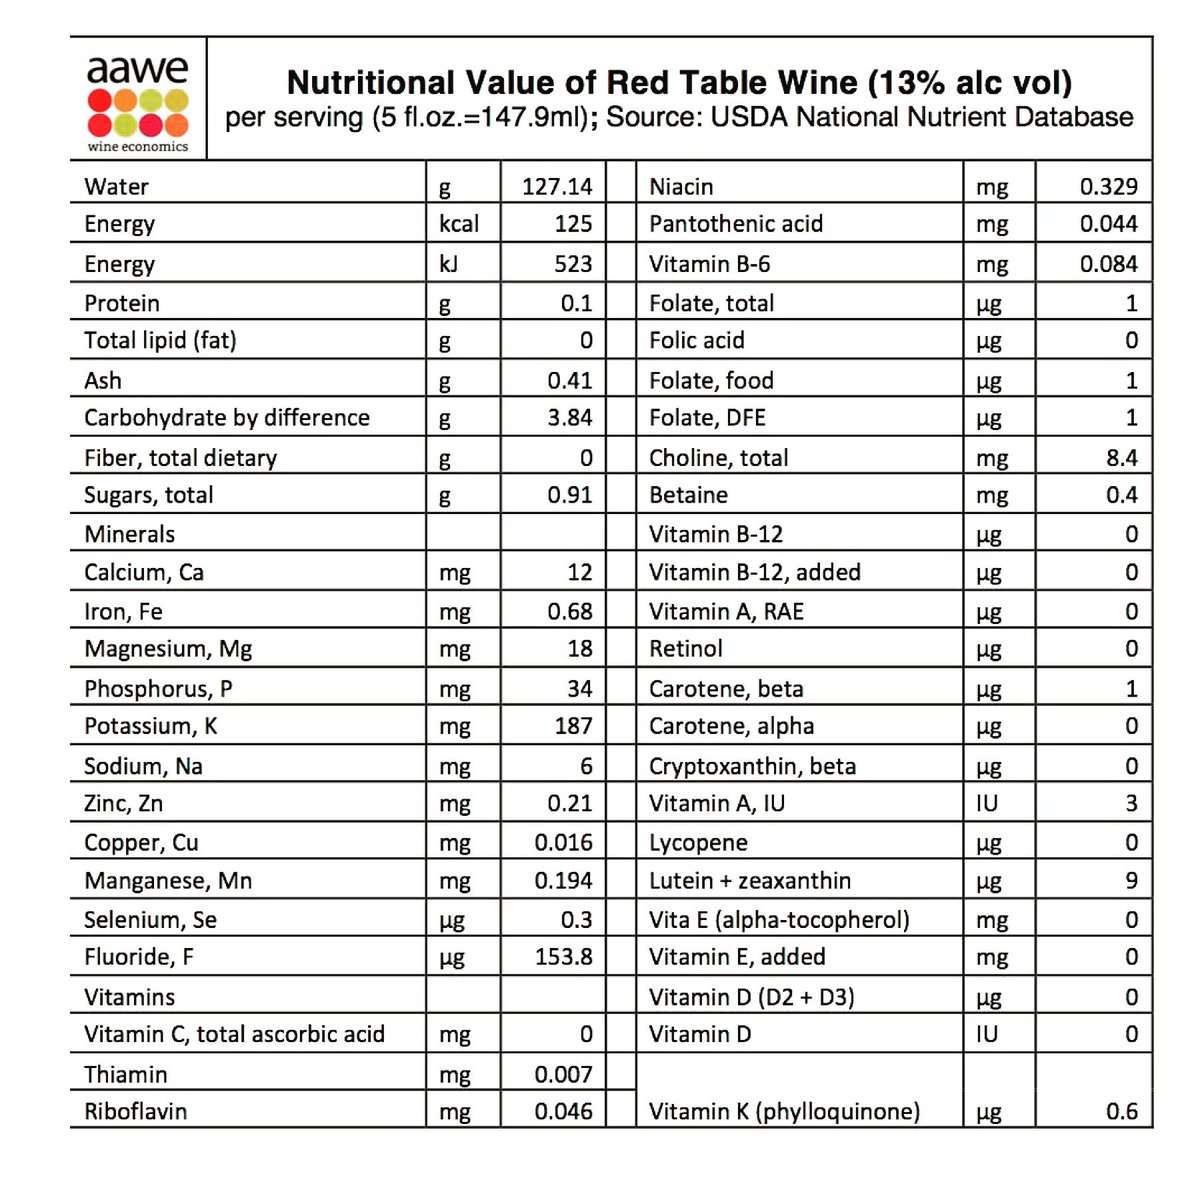 Nutritional value of red wine (13% alc vol)
.
#sundayfunday #sunday #redwine #redwine🍷 #redwinelover #wine #winescience #winenutritionfacts #winenutrition #winelover